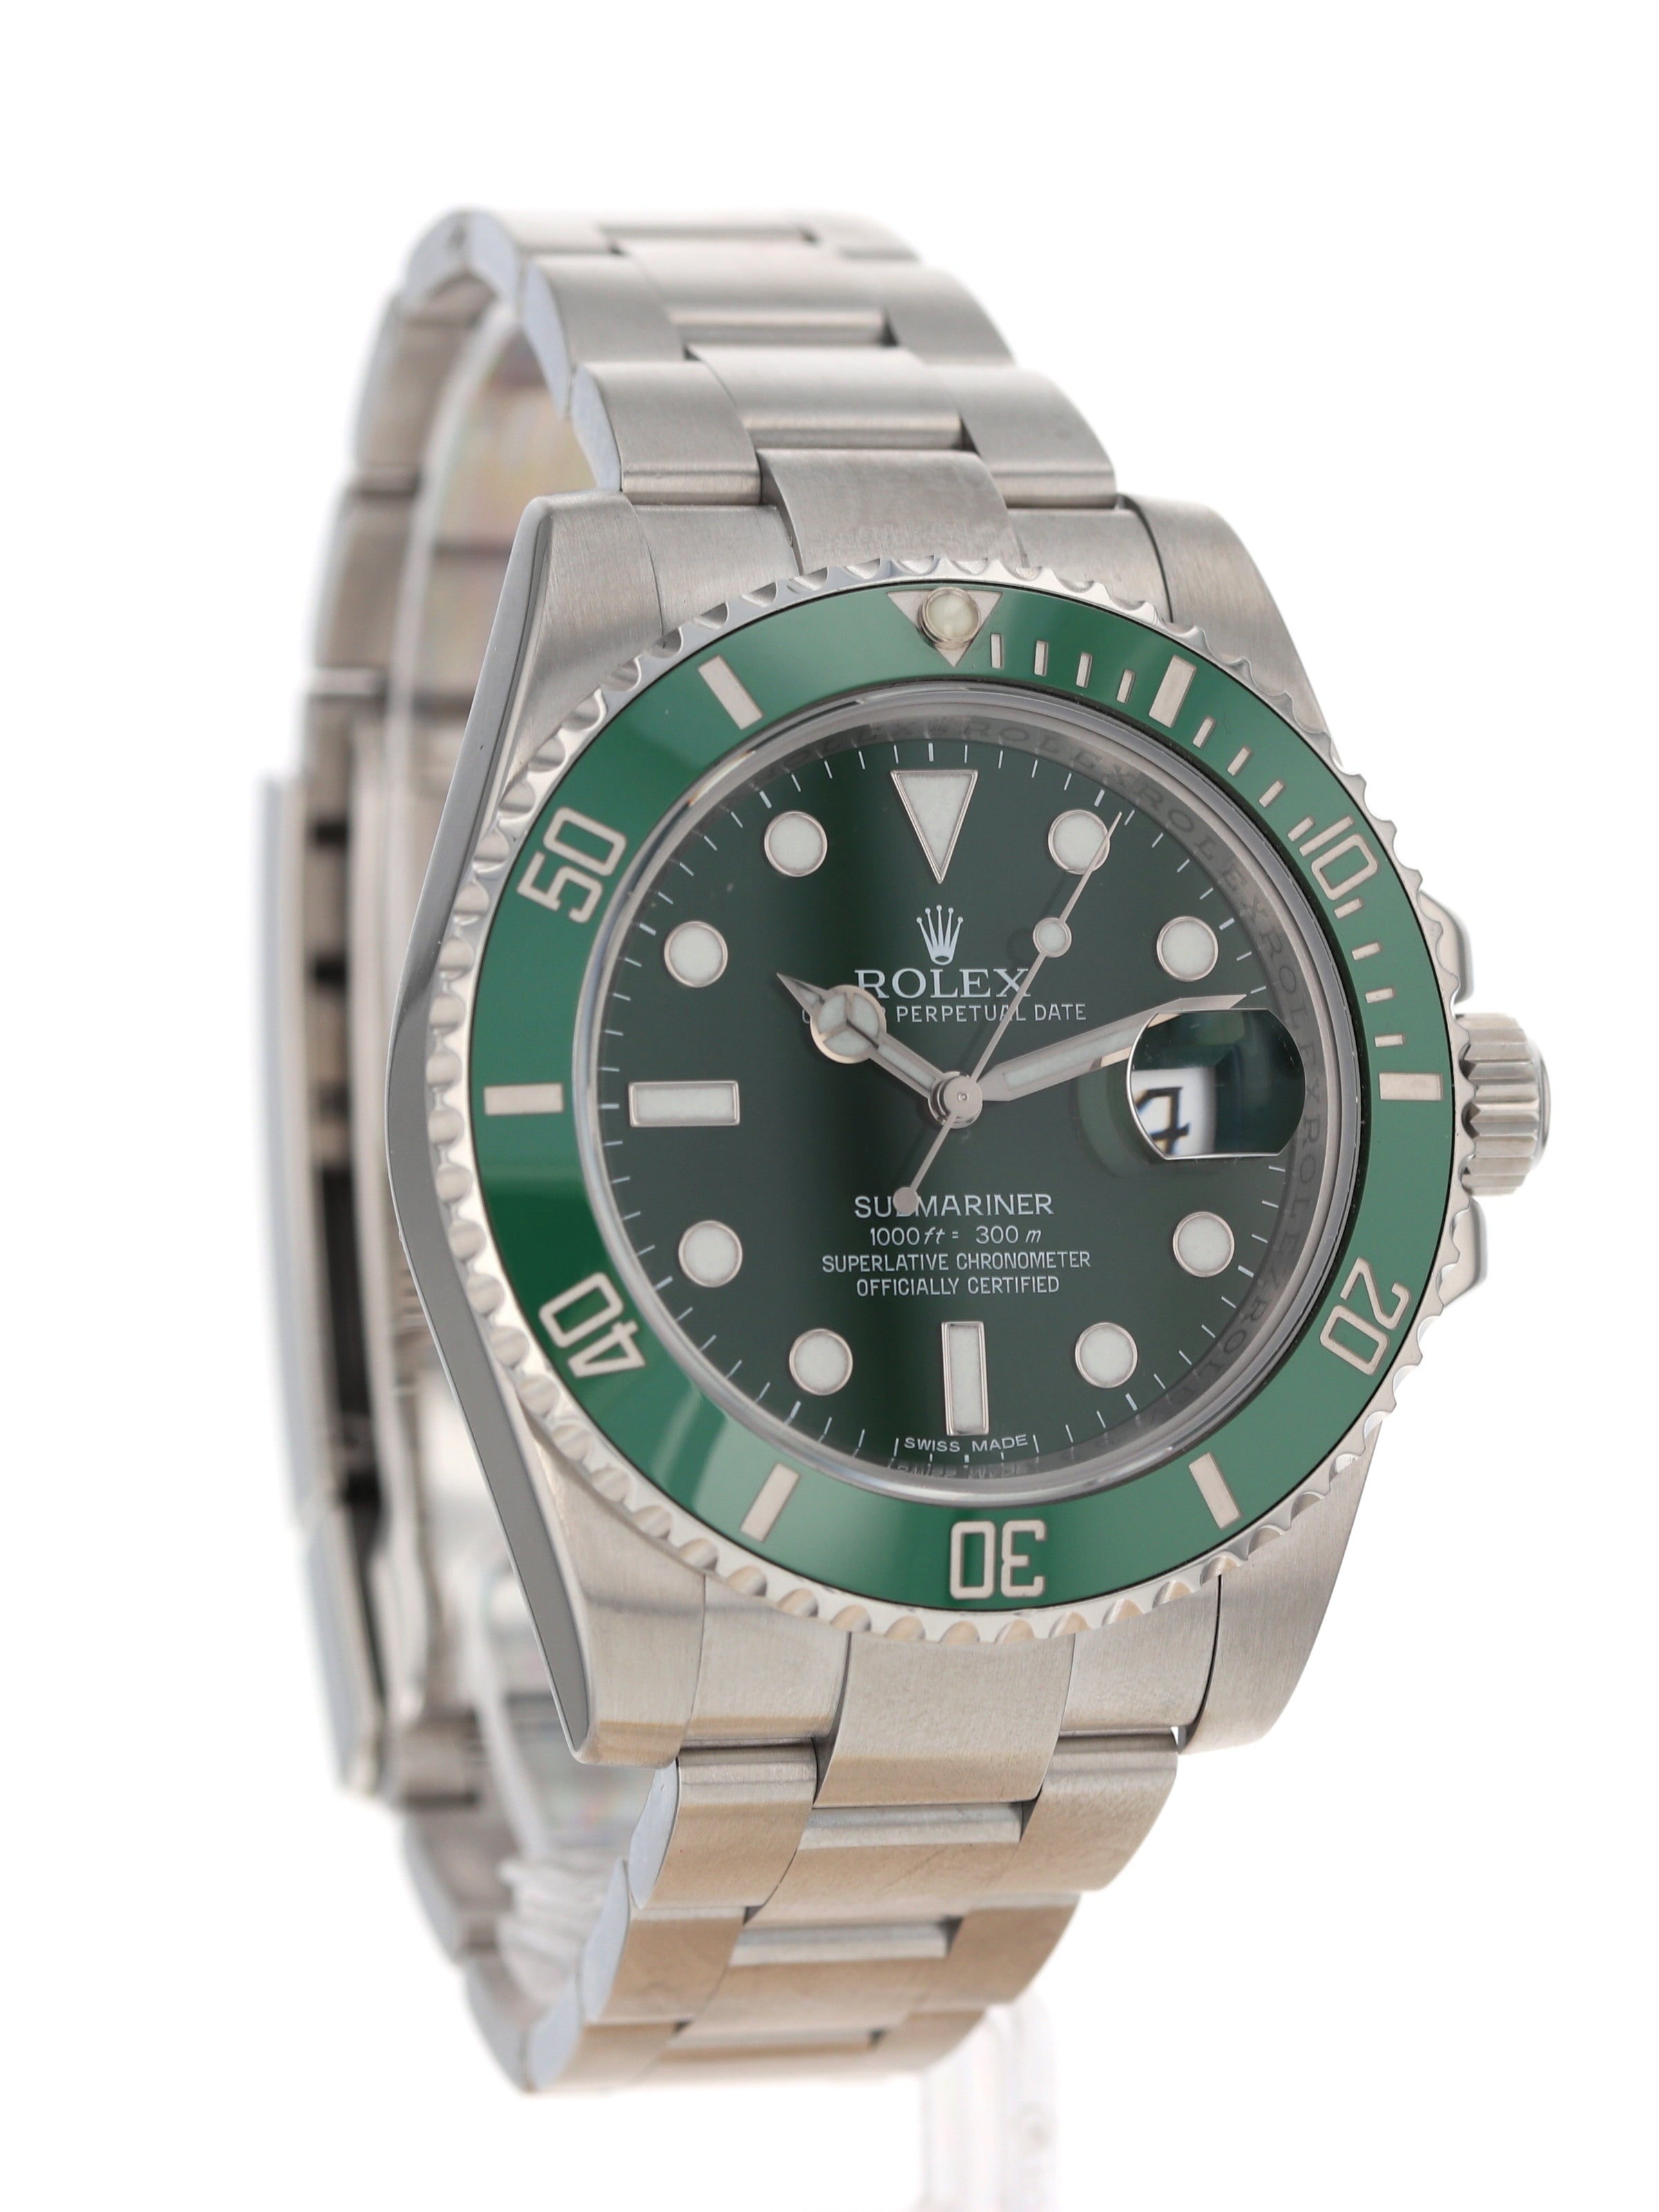 Hulk' Submariner, Ref. 116610 Stainless steel wristwatch with date and  bracelet Circa 2017, Fine Jewels, 2022